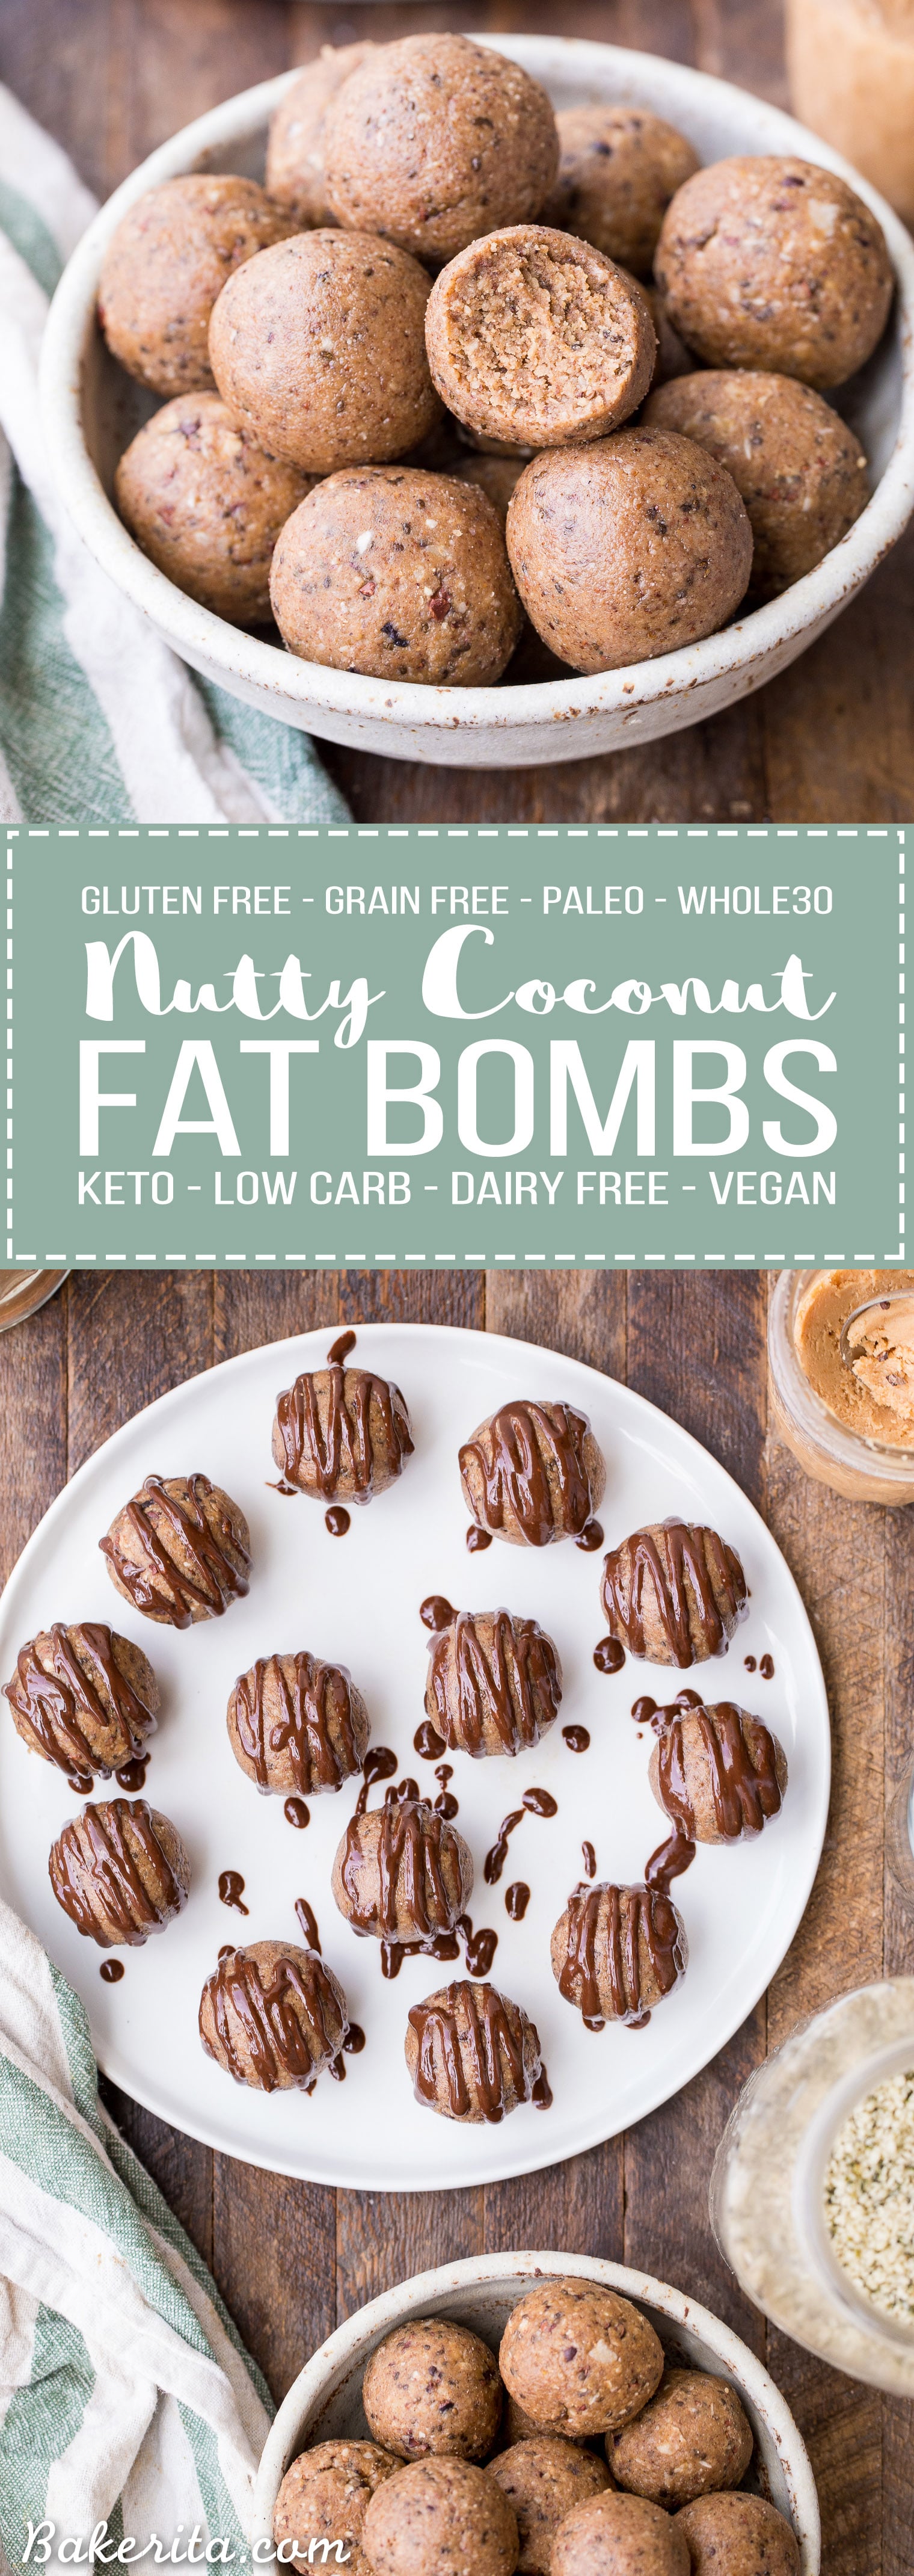 These Nutty Coconut Fat Bombs are an easy-to-make snack that is filling, full of healthy fats, and absolutely delicious! It's a no-bake recipe that's gluten-free, grain-free, paleo, keto, low carb, Whole30-friendly, and vegan. 